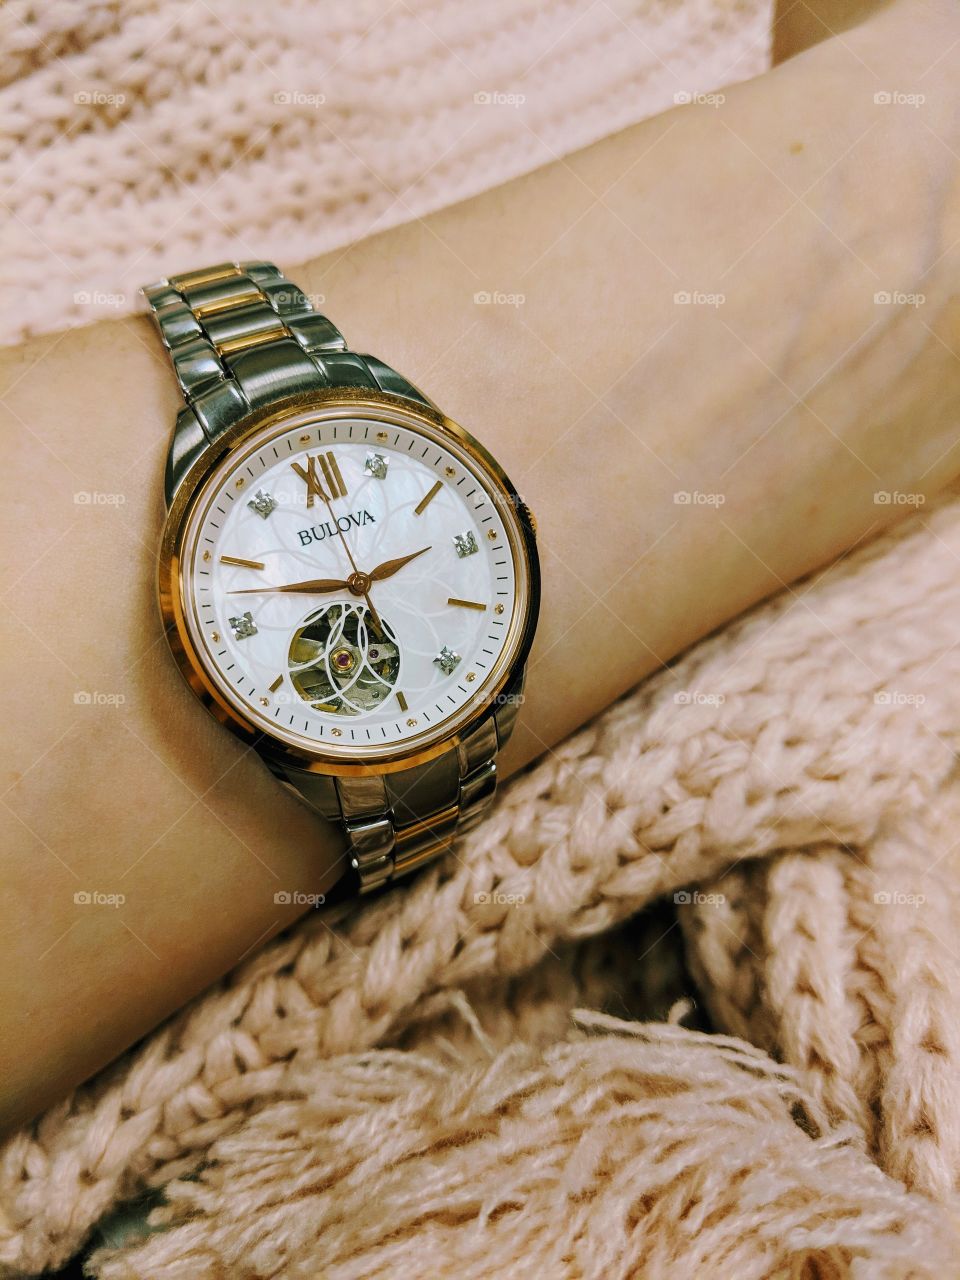 Bulova watch with rose gold details